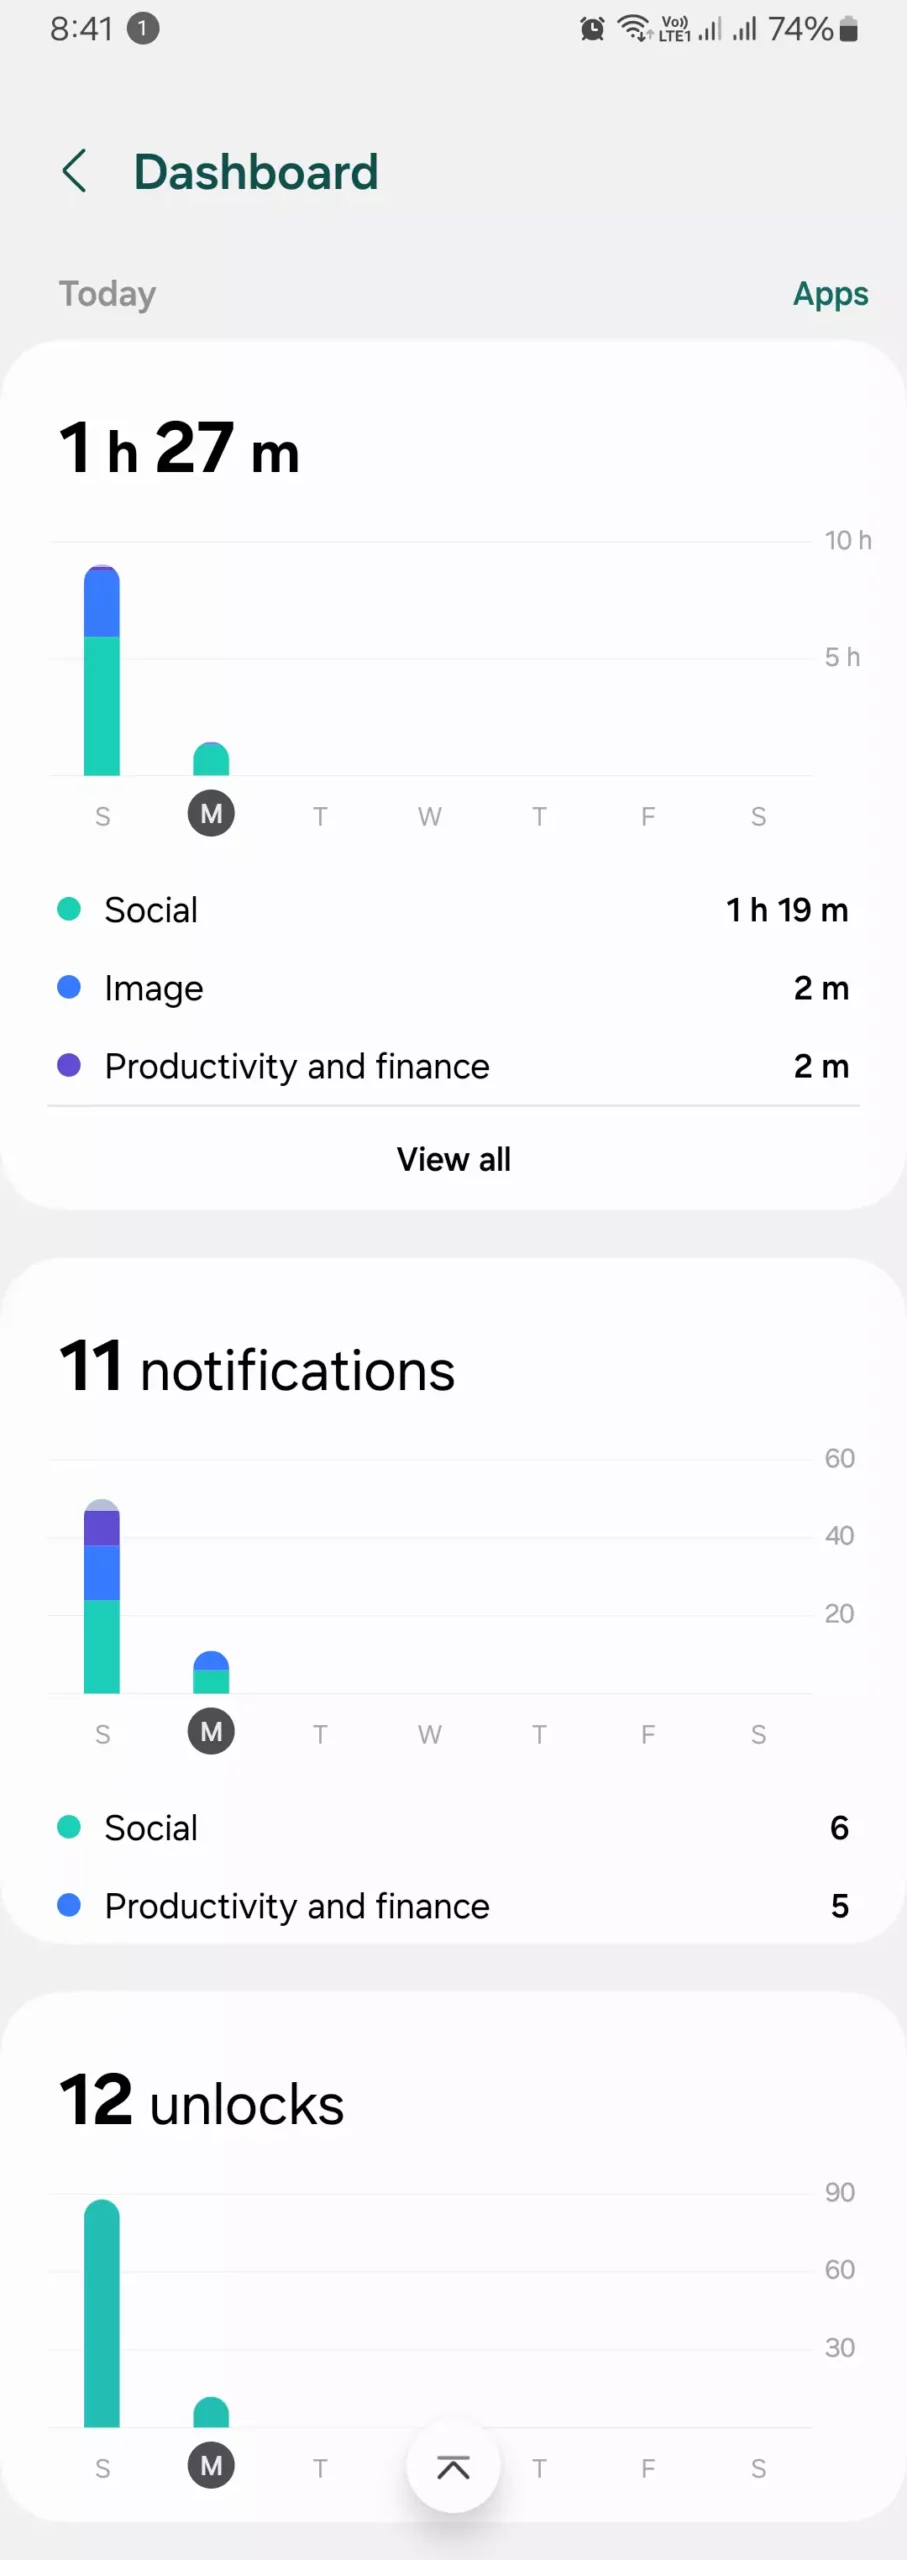 screenshot of complete dashboard of screentime, notifications and unlocks